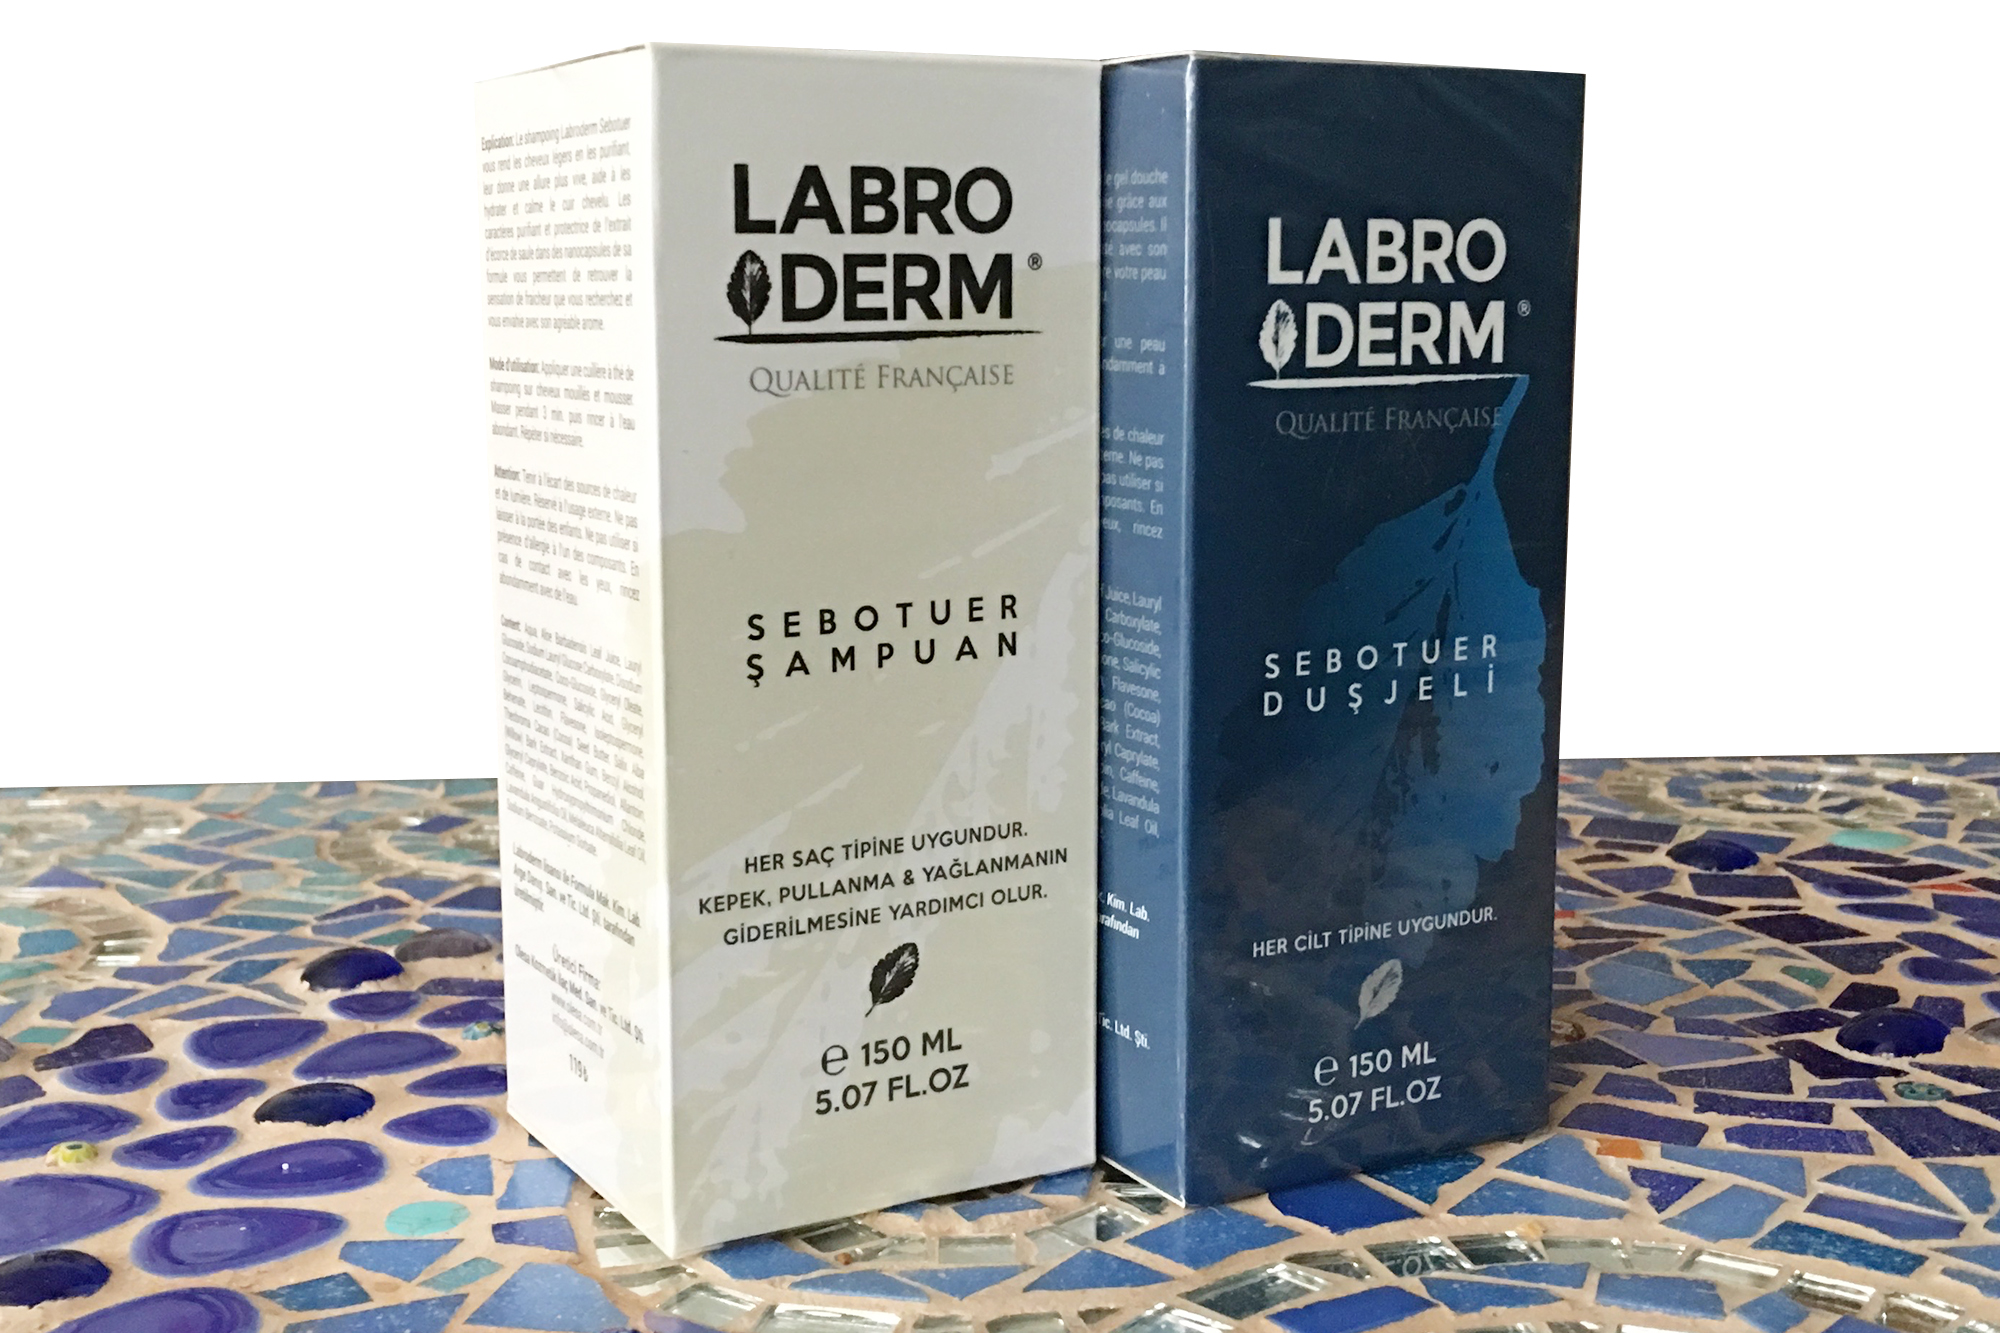 Labroderm Packaging